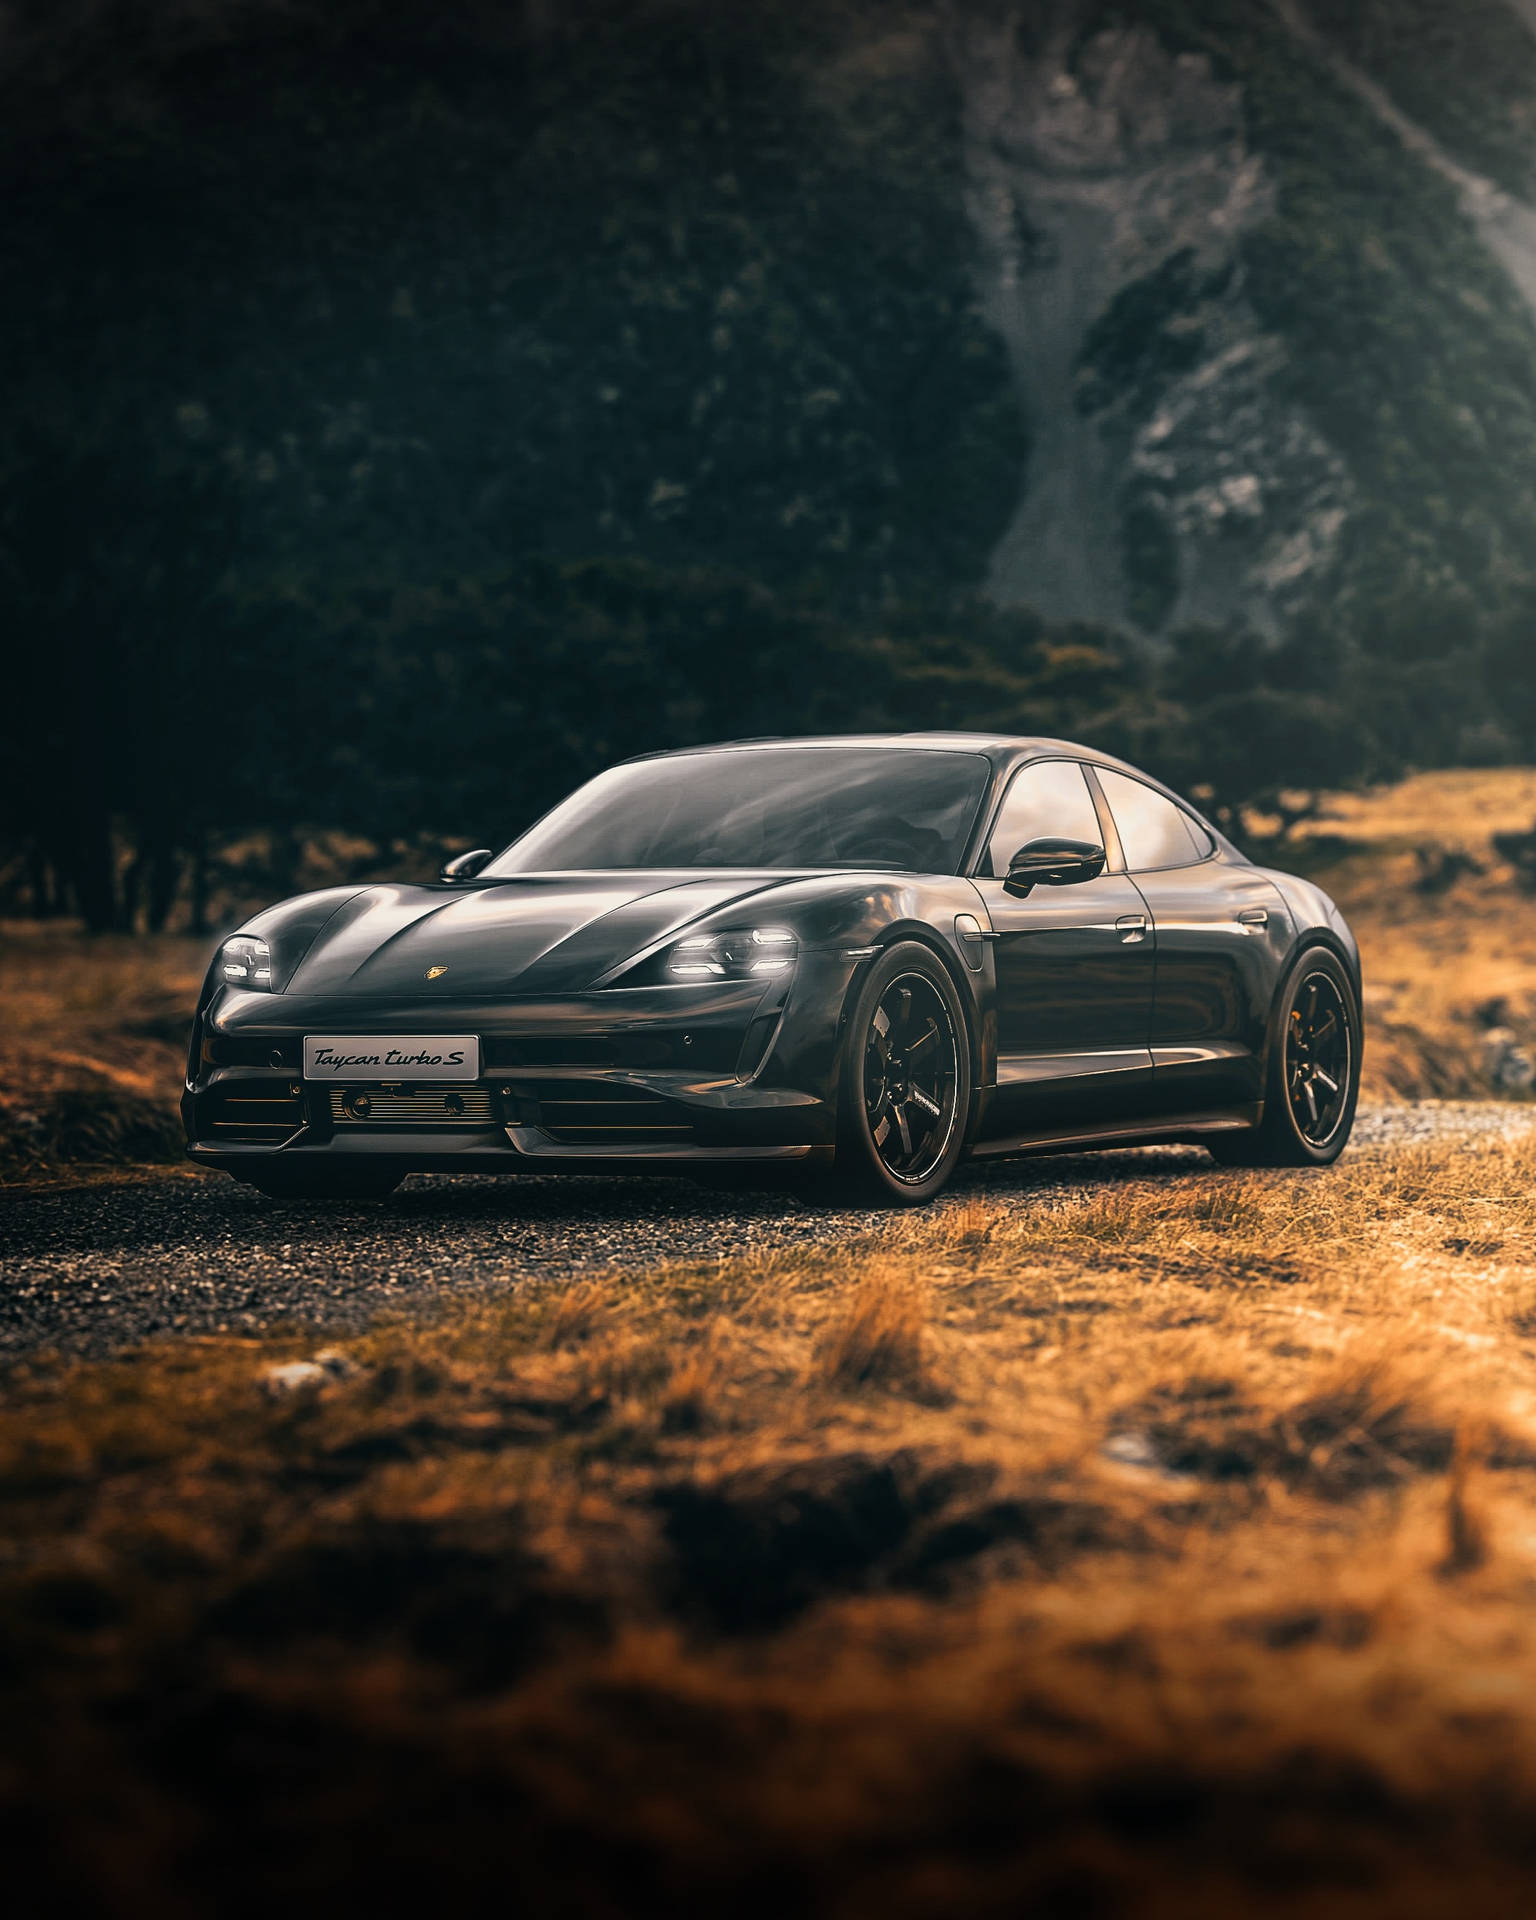 Taycan Turbo S Car In Nature Background